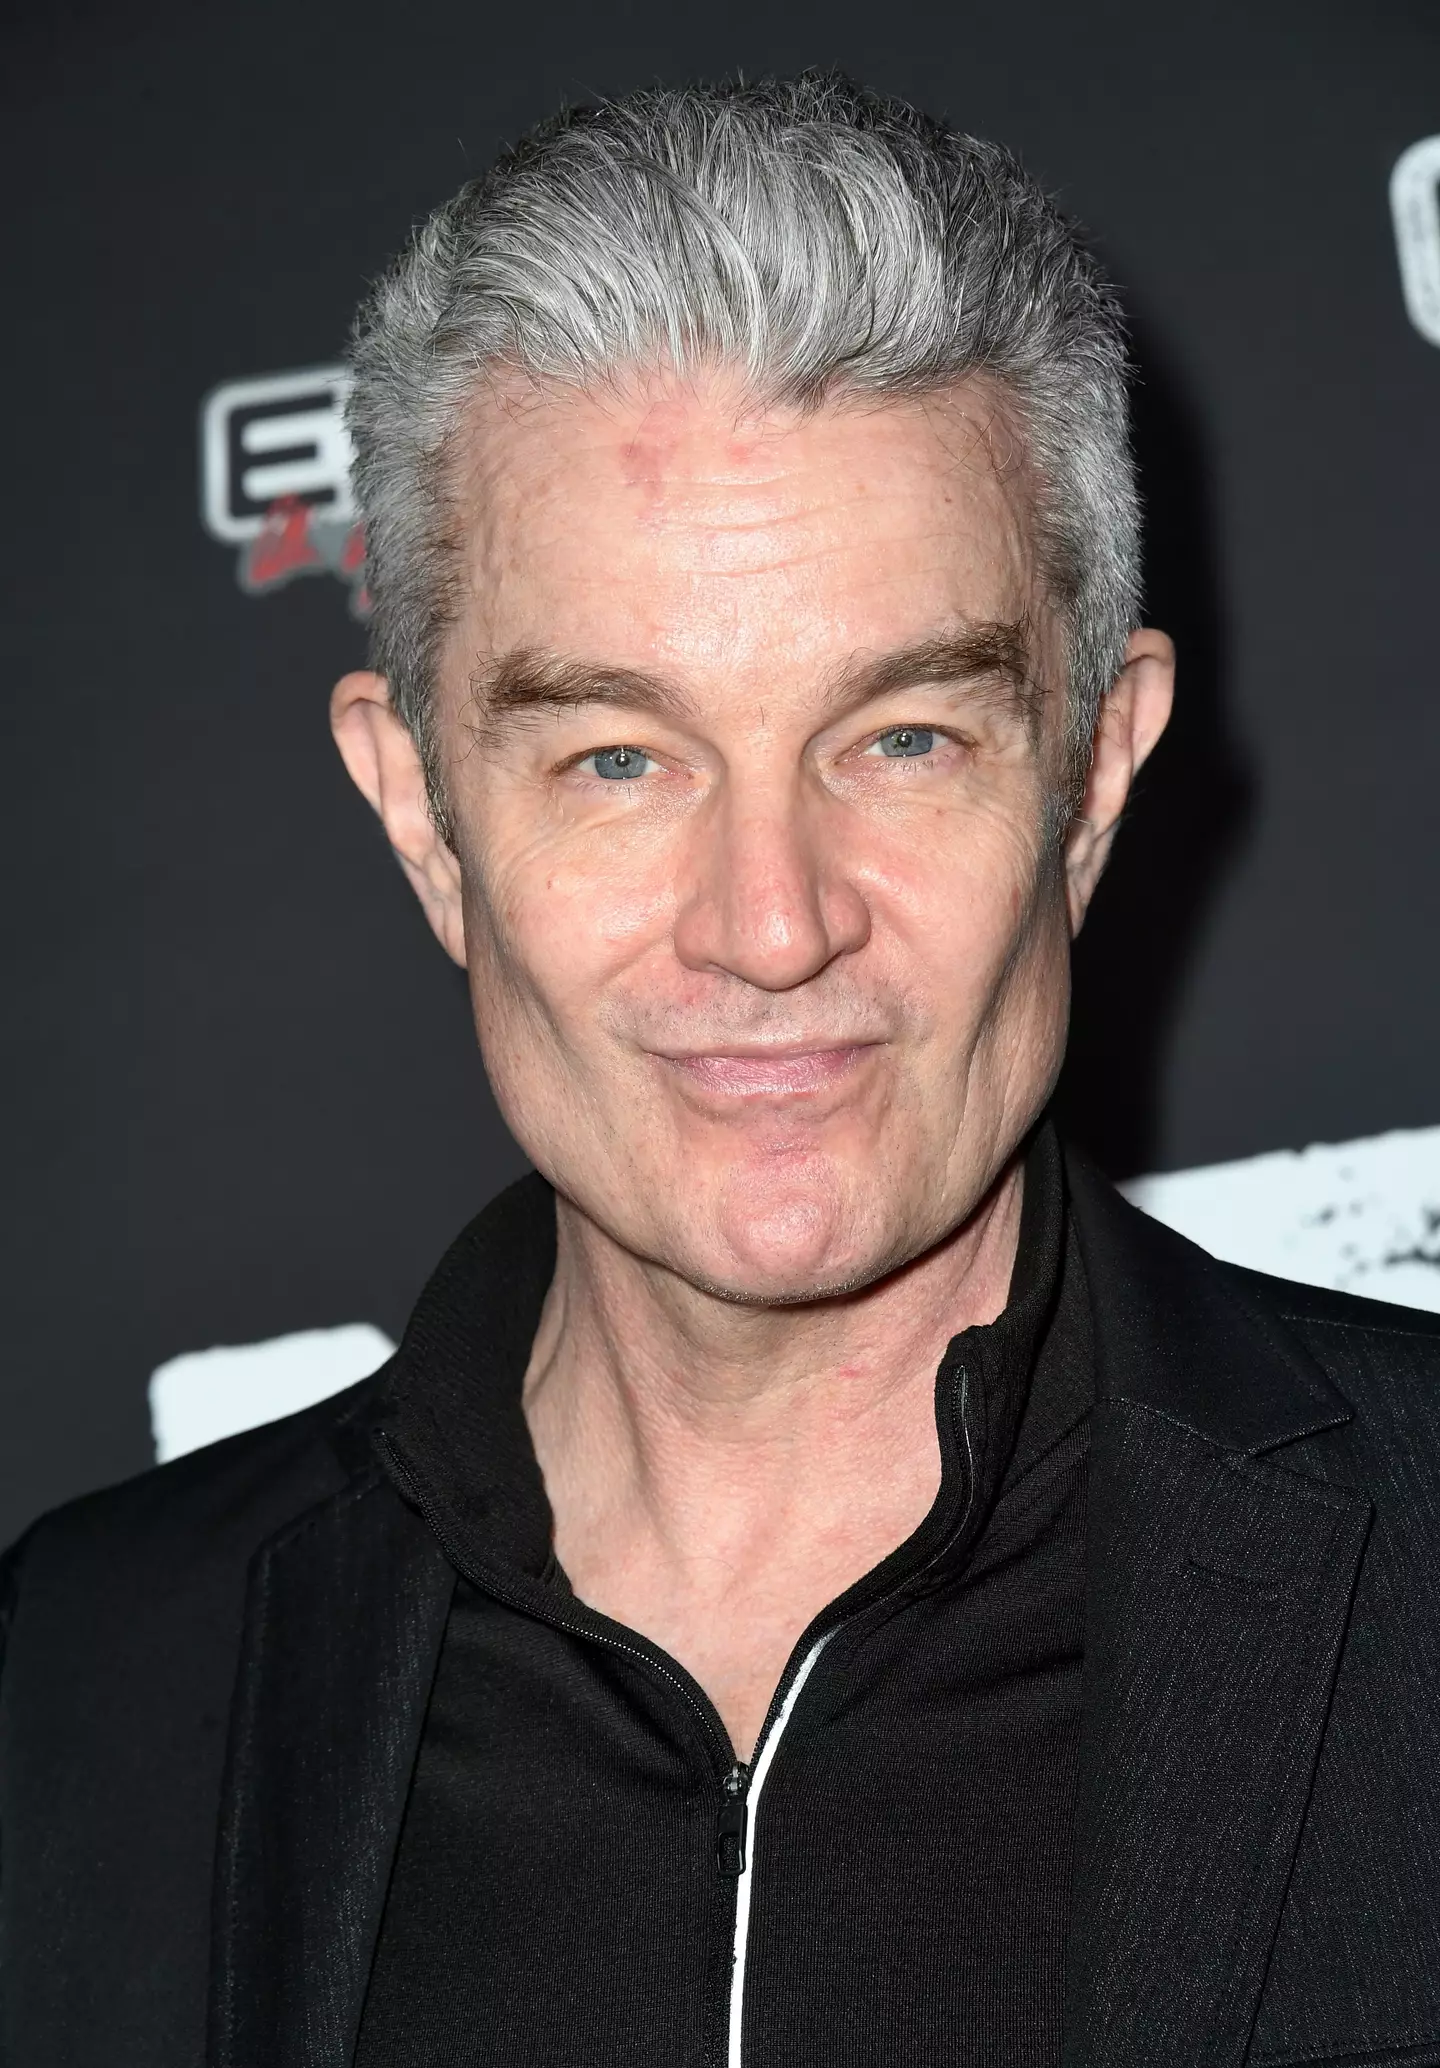 James Marsters played Spike in the original series.